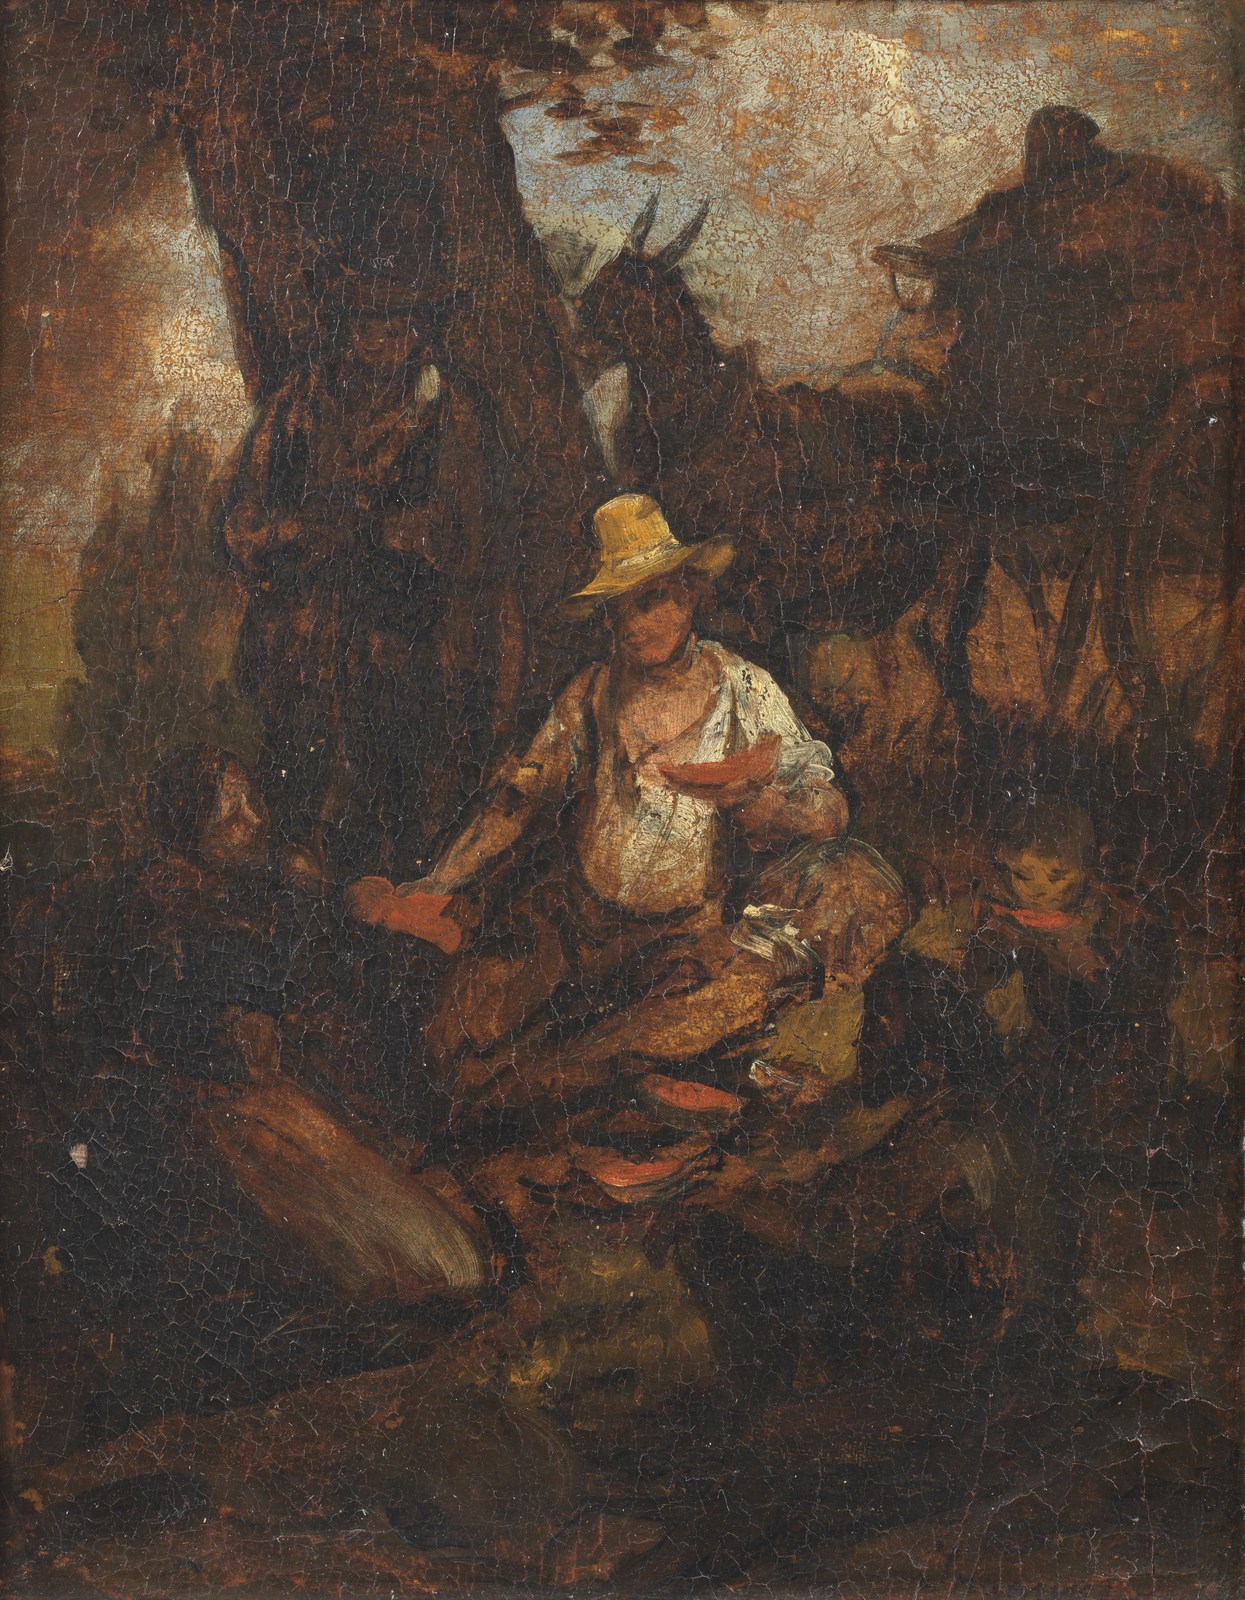 Landscape with peasants and cart (Angelo Inganni)